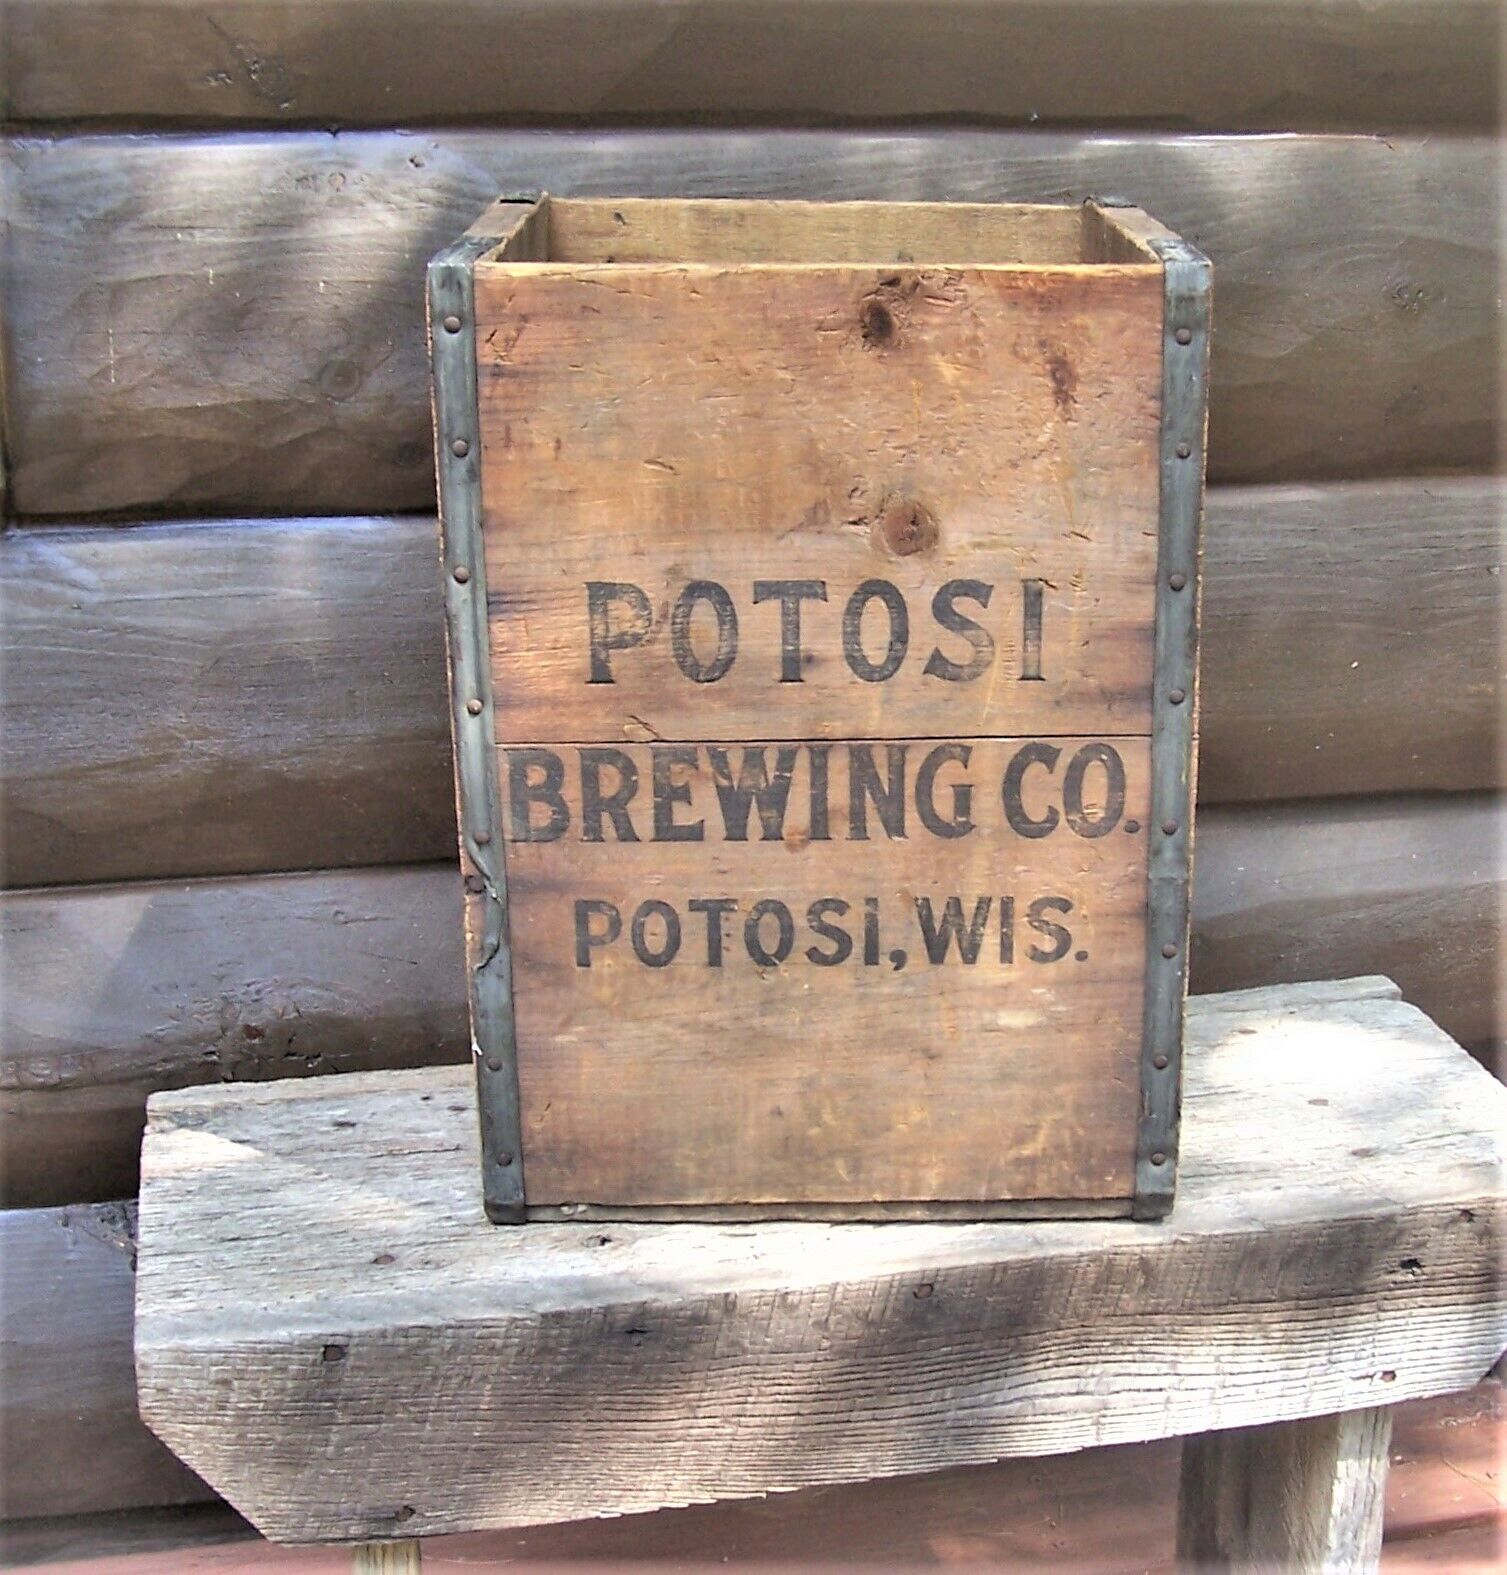 Potosi Brewing Company Wisconsin Half Gallon Beer Bottle Wood Crate Box Carrier